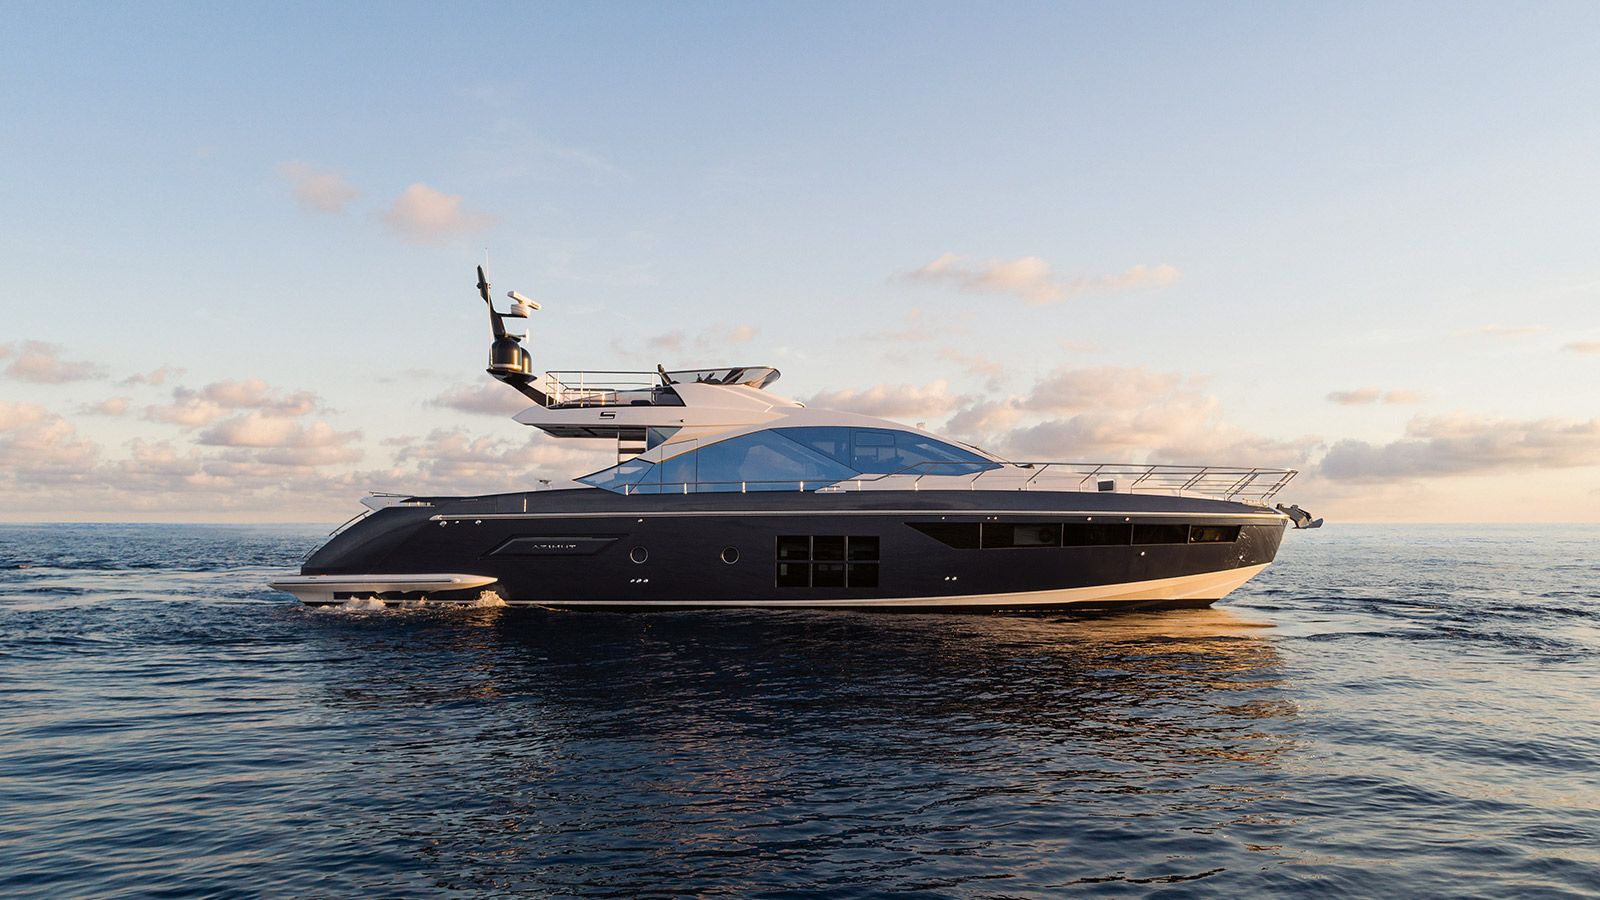 New Azimut S7 M/Y Limitless for charter with IYC from 2019 - IYC